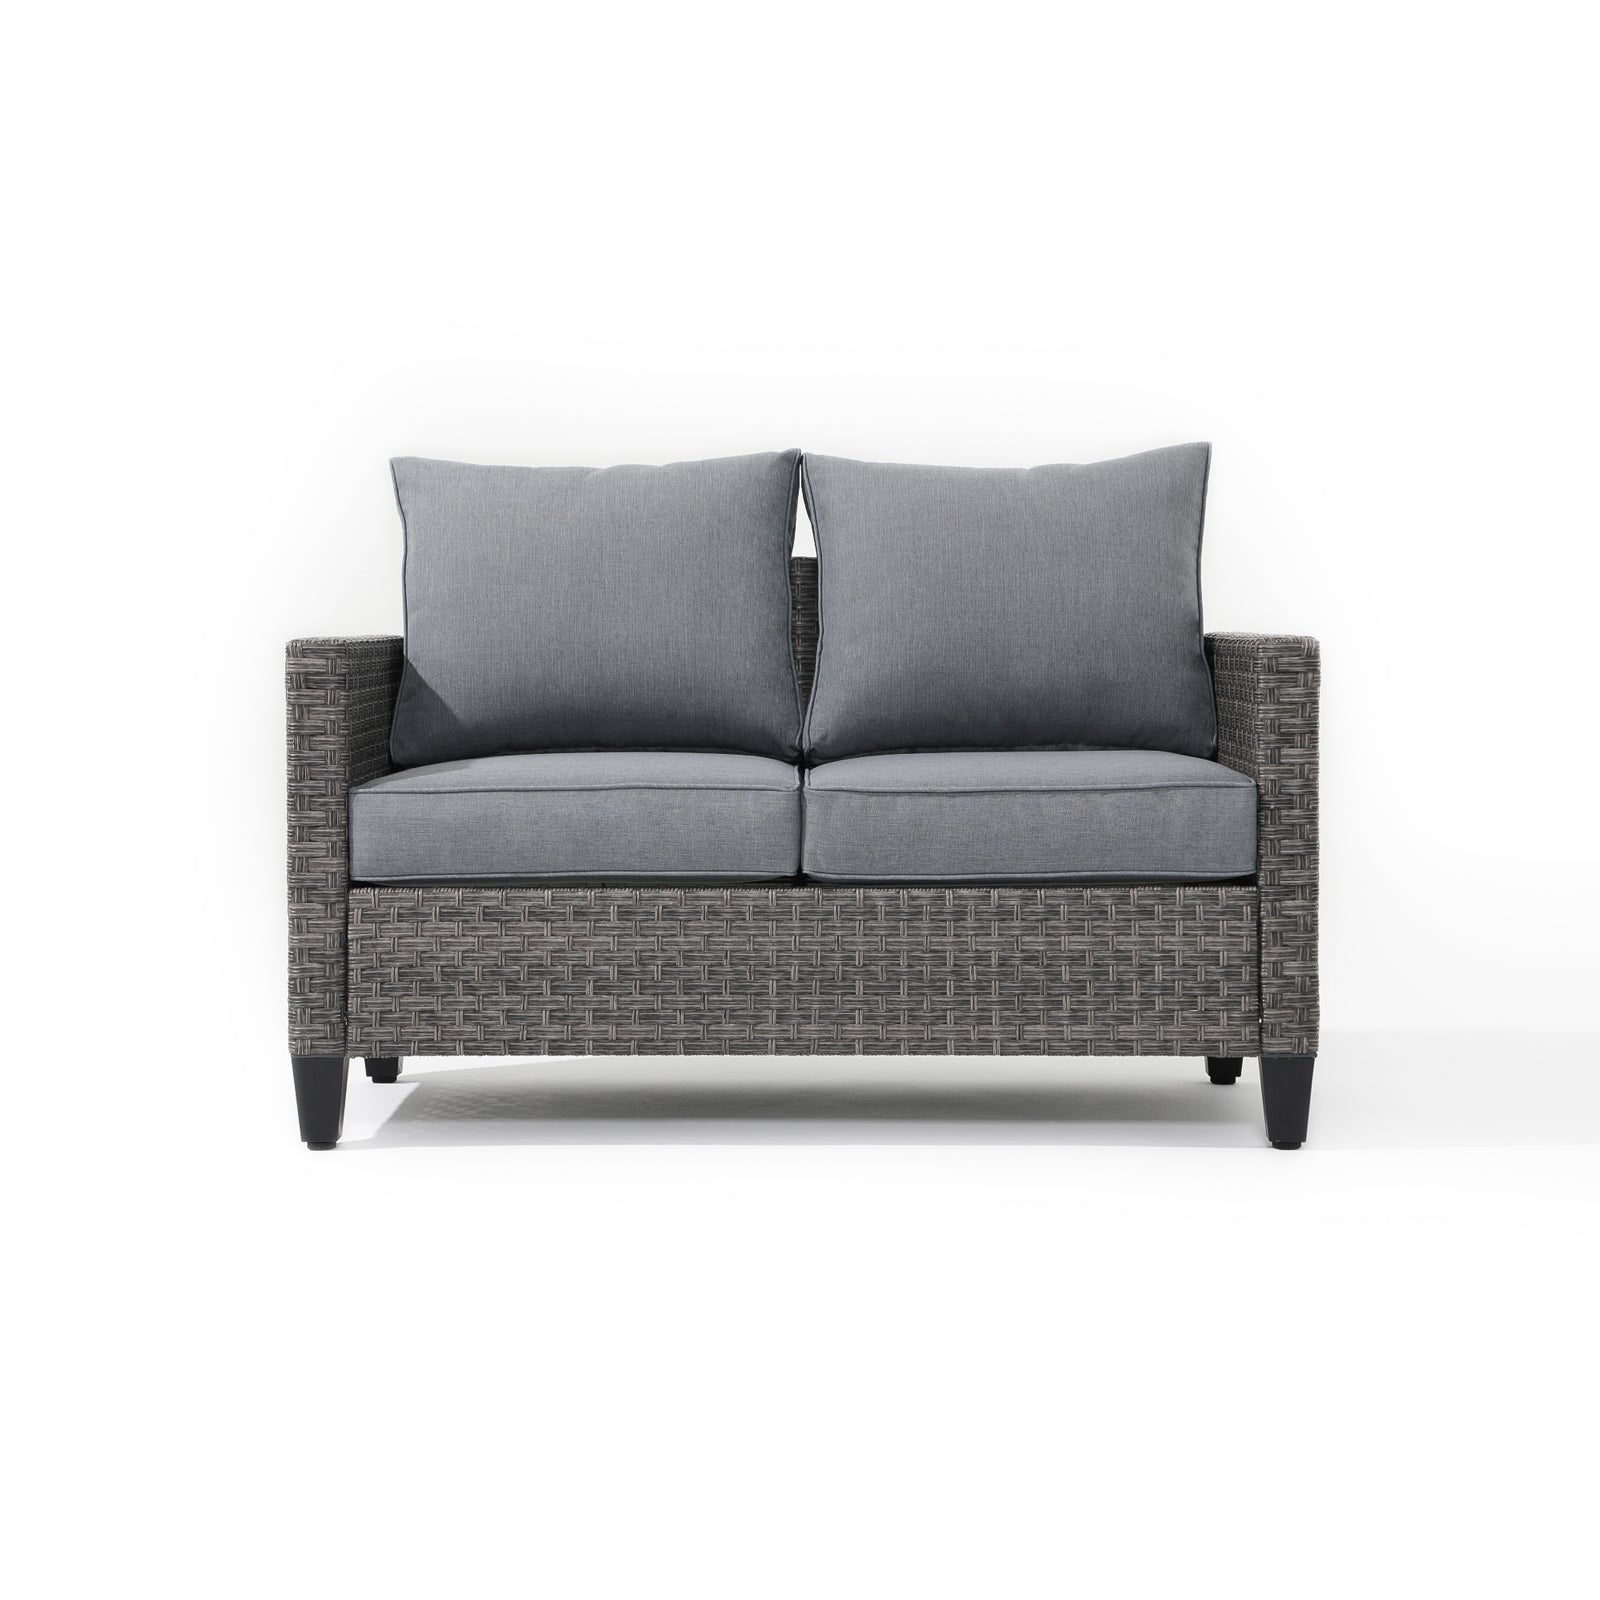 Ayia Modern HDPE Wicker Outdoor Furniture, patio loveseat with grey rattan design, grey cushions, Front angle - Jardina Furniture #color_Grey